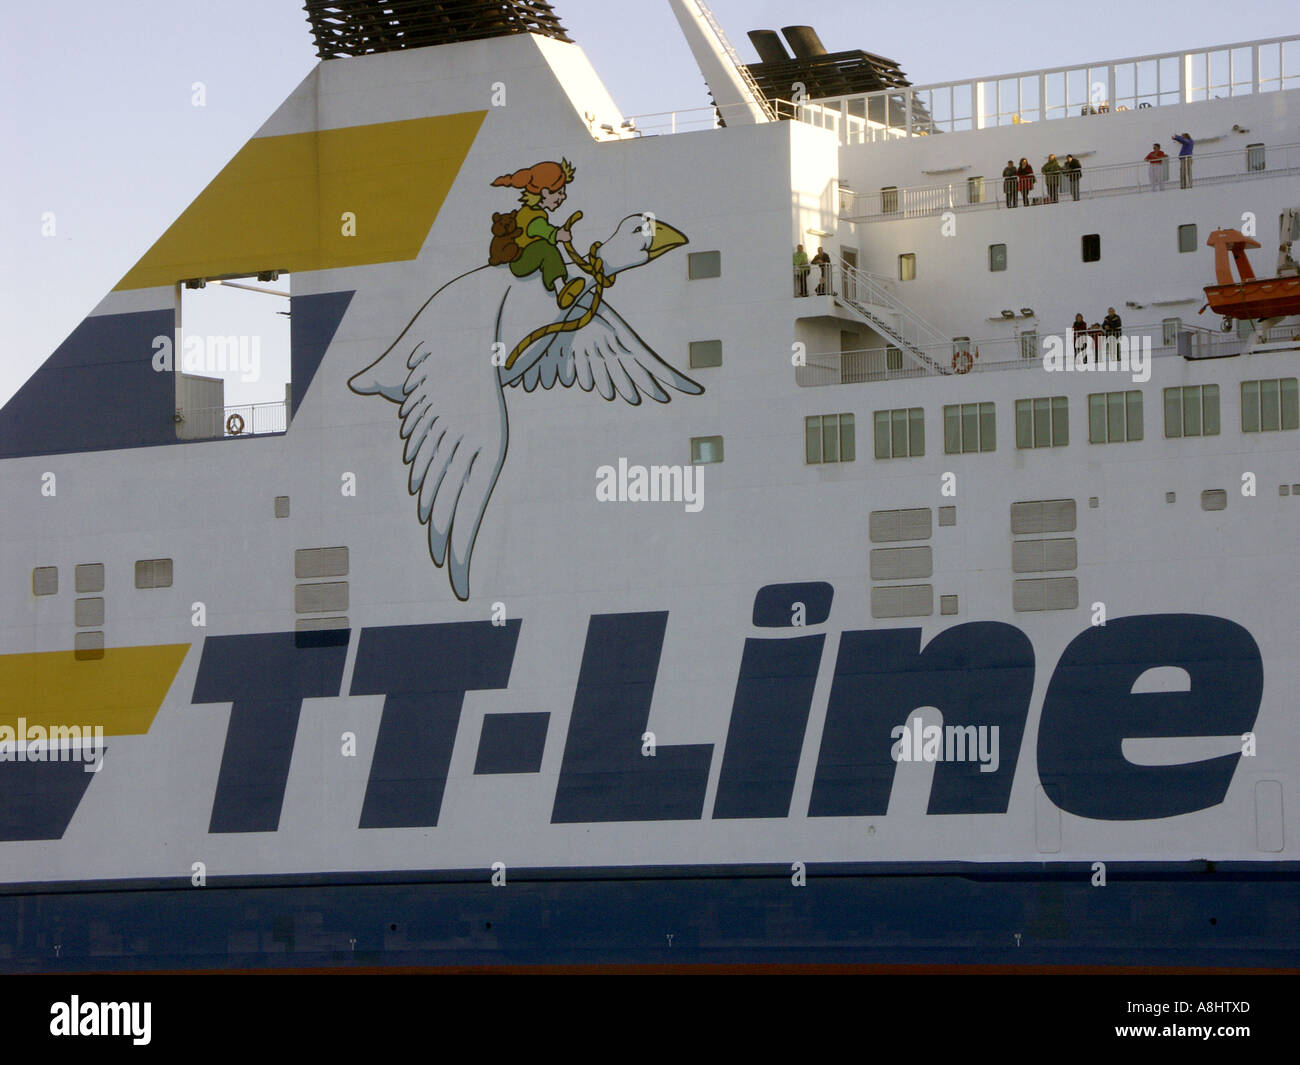 Ferry ship of the TT line 'Nils Holgersson' Stock Photo